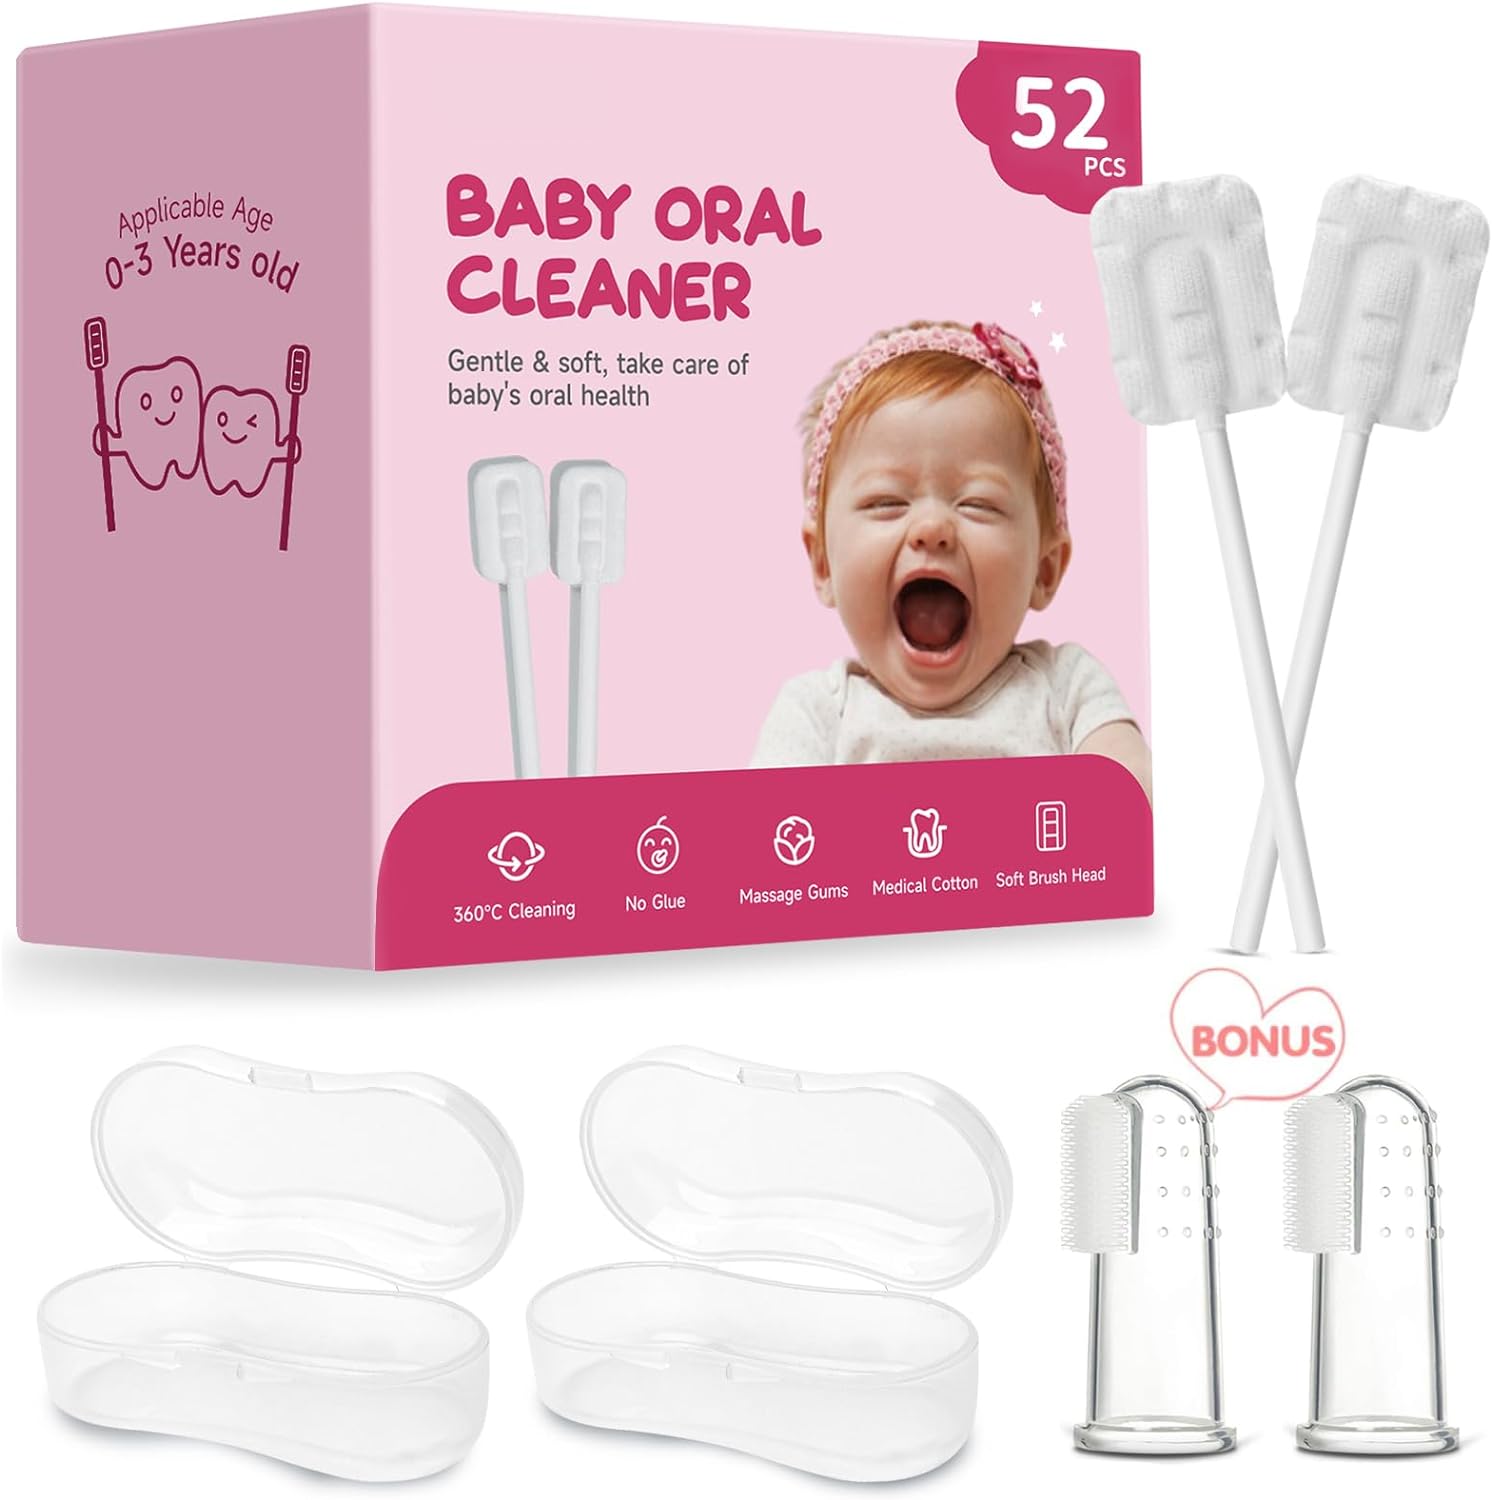 [Upgrade] Baby Tongue Cleaner Newborn Baby Toothbrush 52PCS, Baby Oral Cleaner, Disposable Infant Toothbrush Baby Mouth Cleaner, Gum Cleaner Stick Dental Care for 0-36 Month Baby+2 Finger Toothbrush